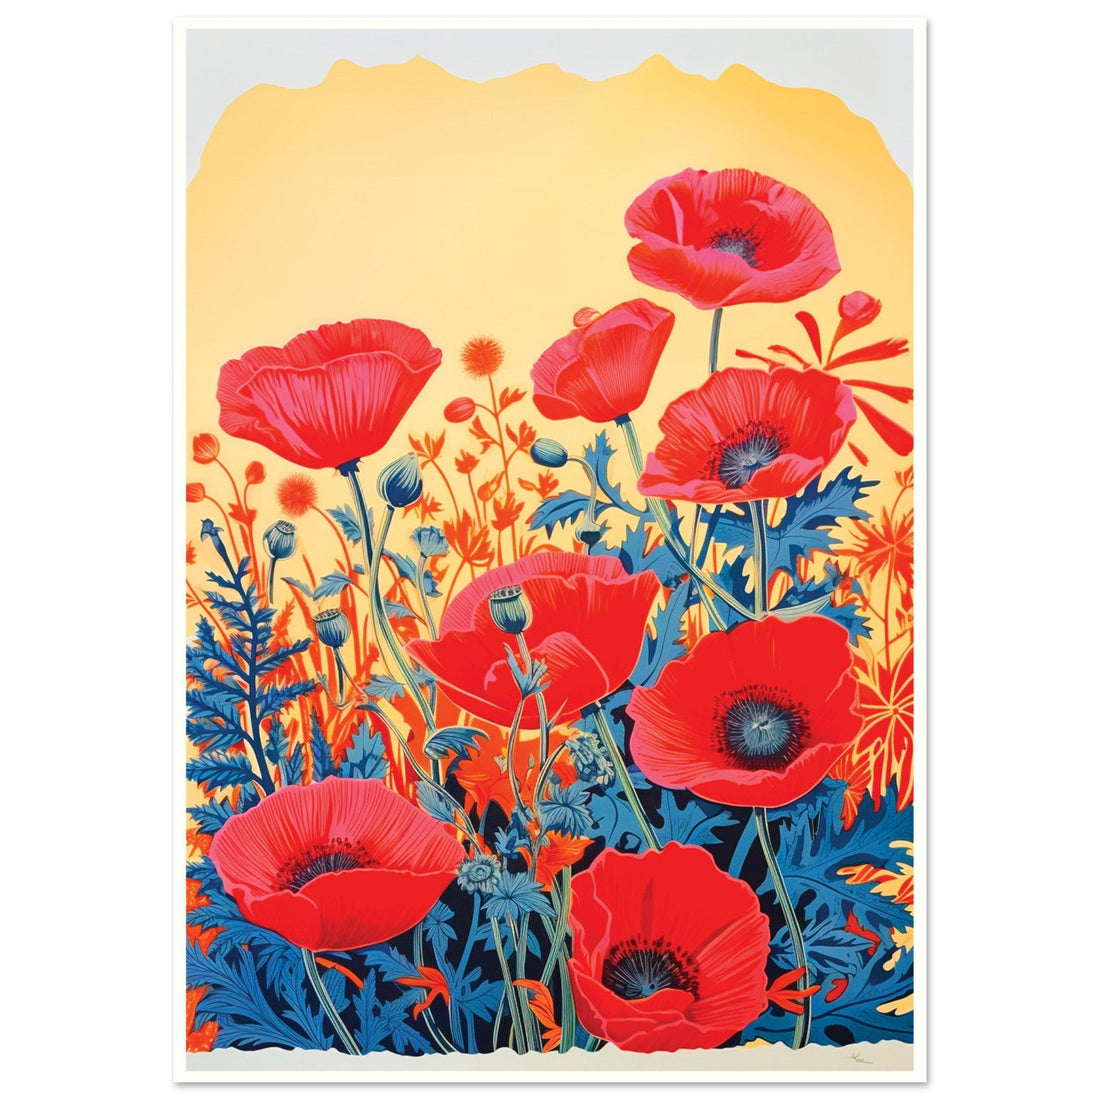 Risograph Red Poppies framed, Floral Print, Red Poppies, Risograph Flowers, #illieeart